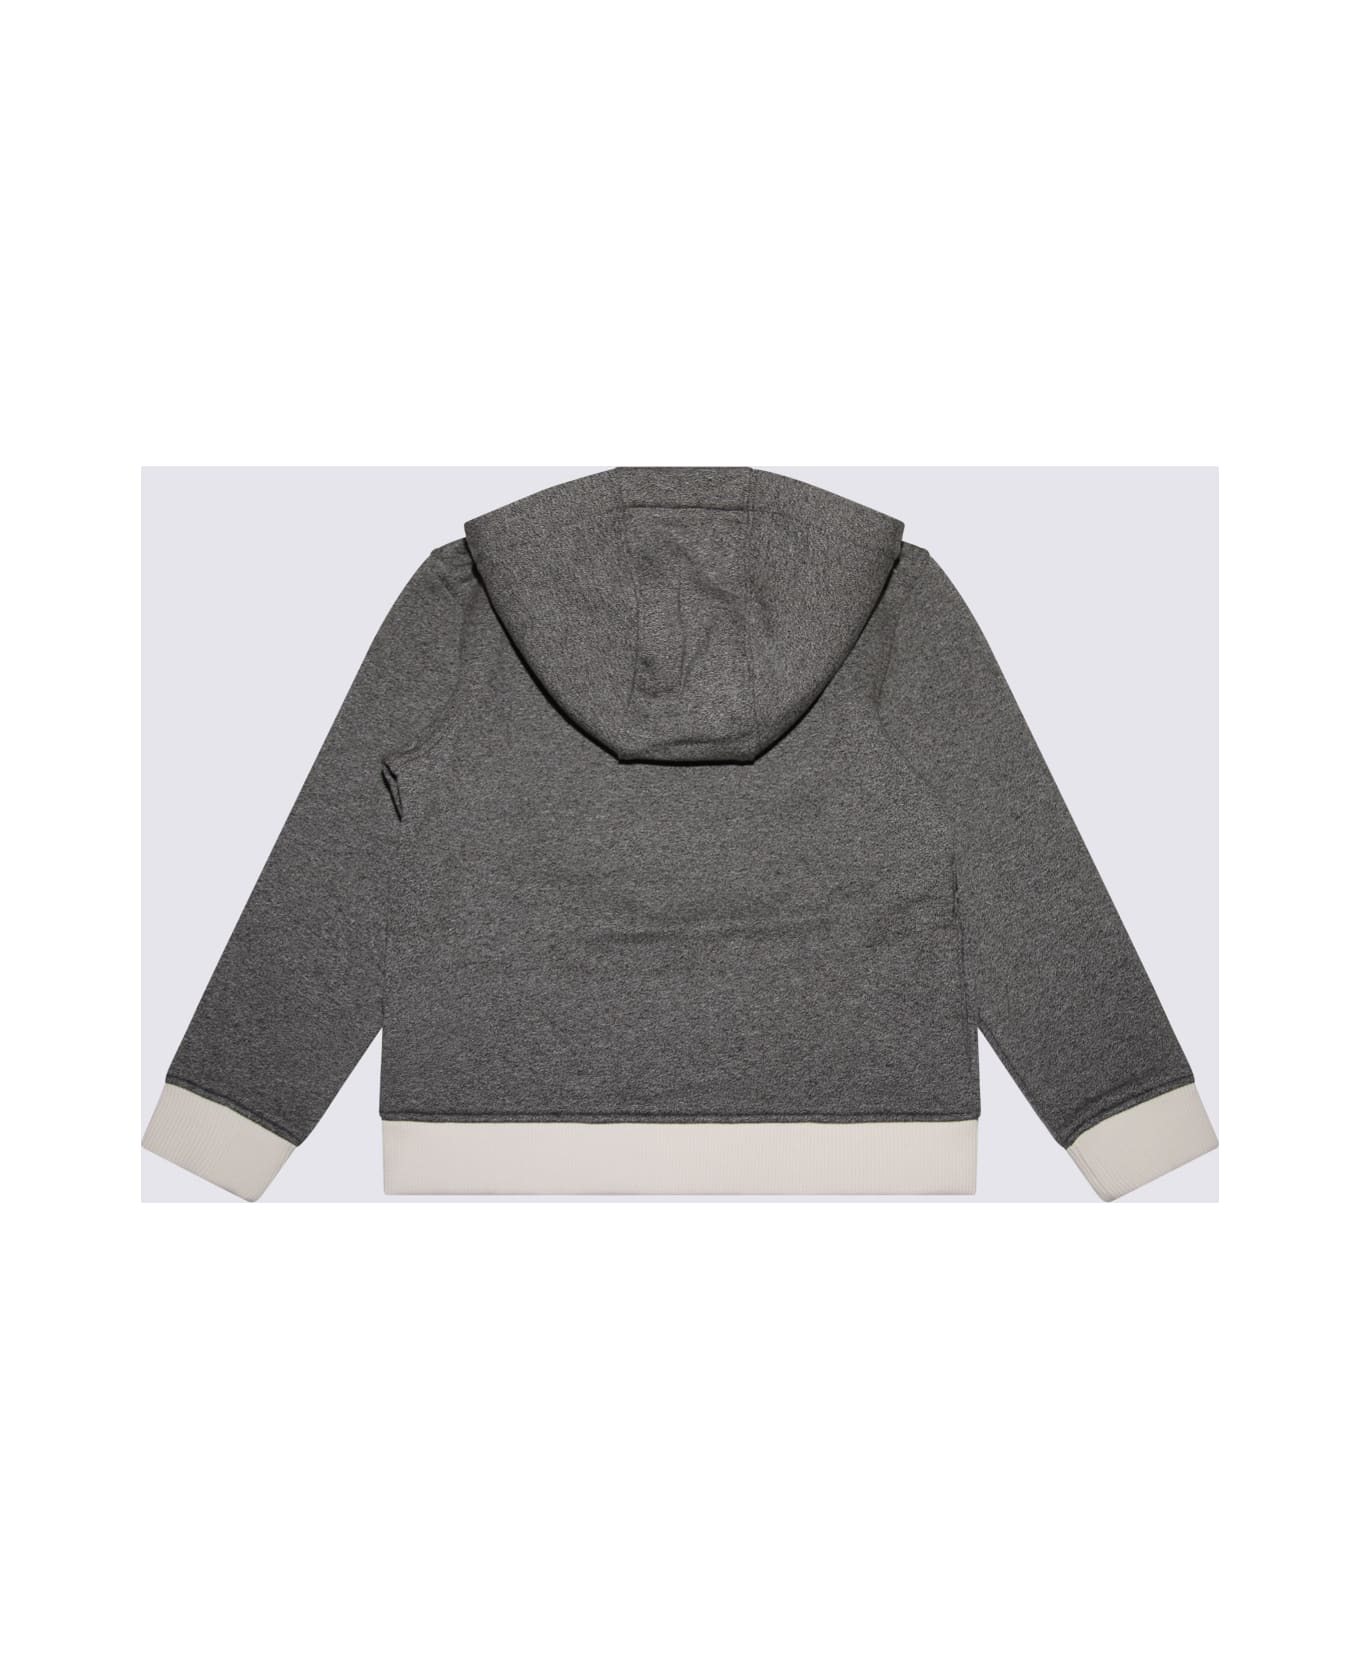 Burberry Grey And White Cotton Sweatshirt - CHARCOAL GREY MELANG